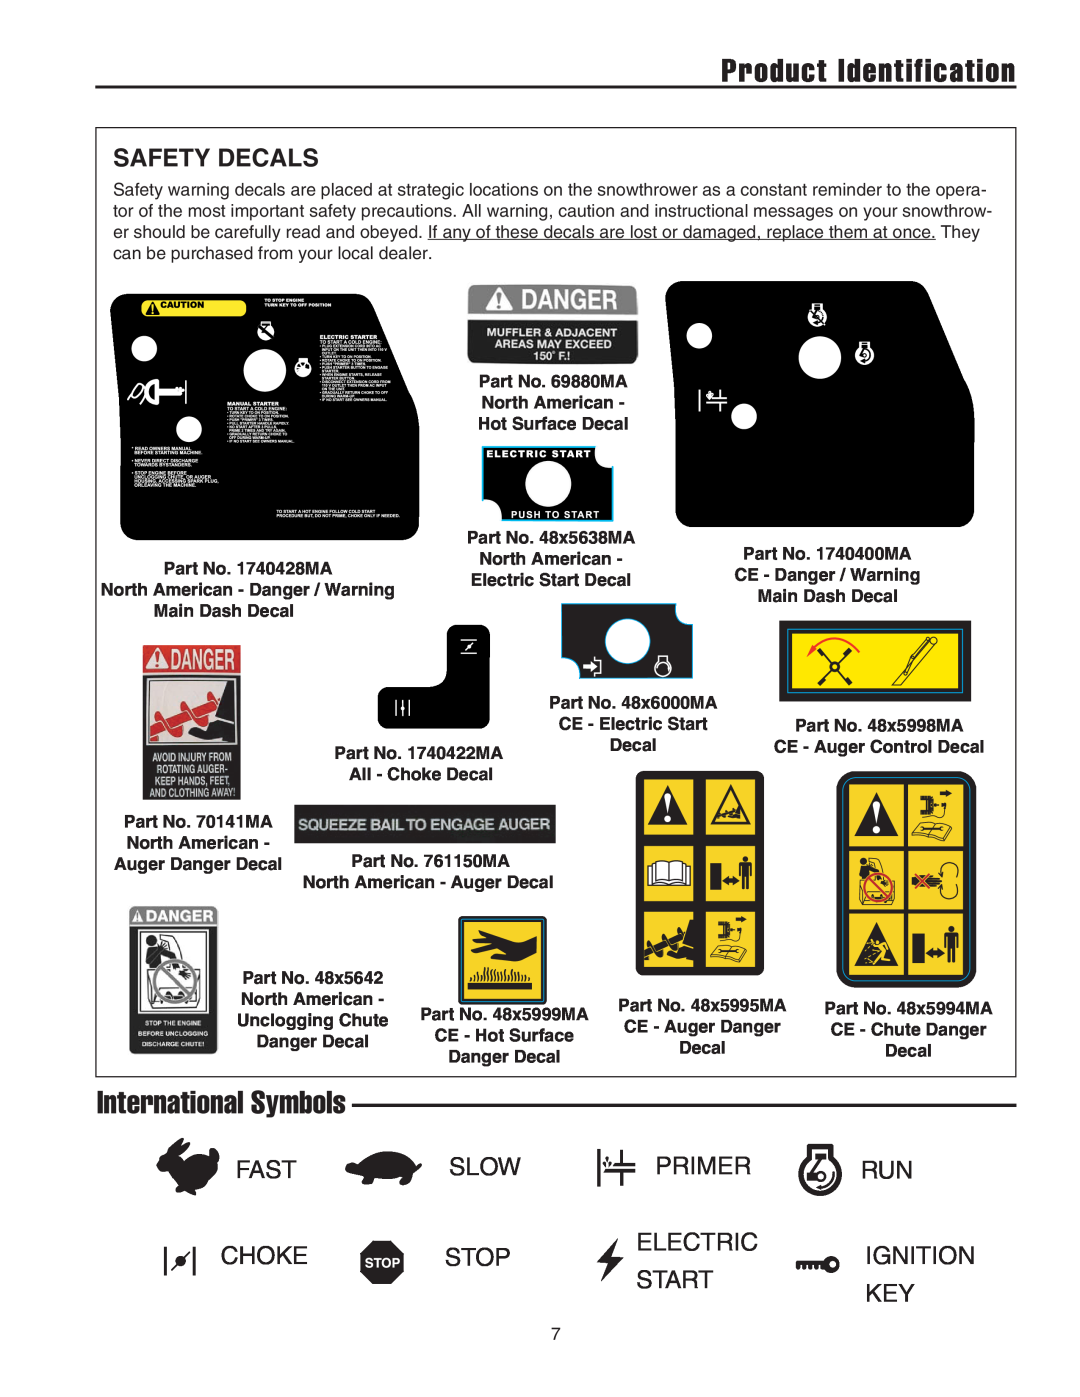 Snapper 522E International Symbols, Safety Decals, Part No. 69880MA North American Hot Surface Decal, Part No. 48x5638MA 